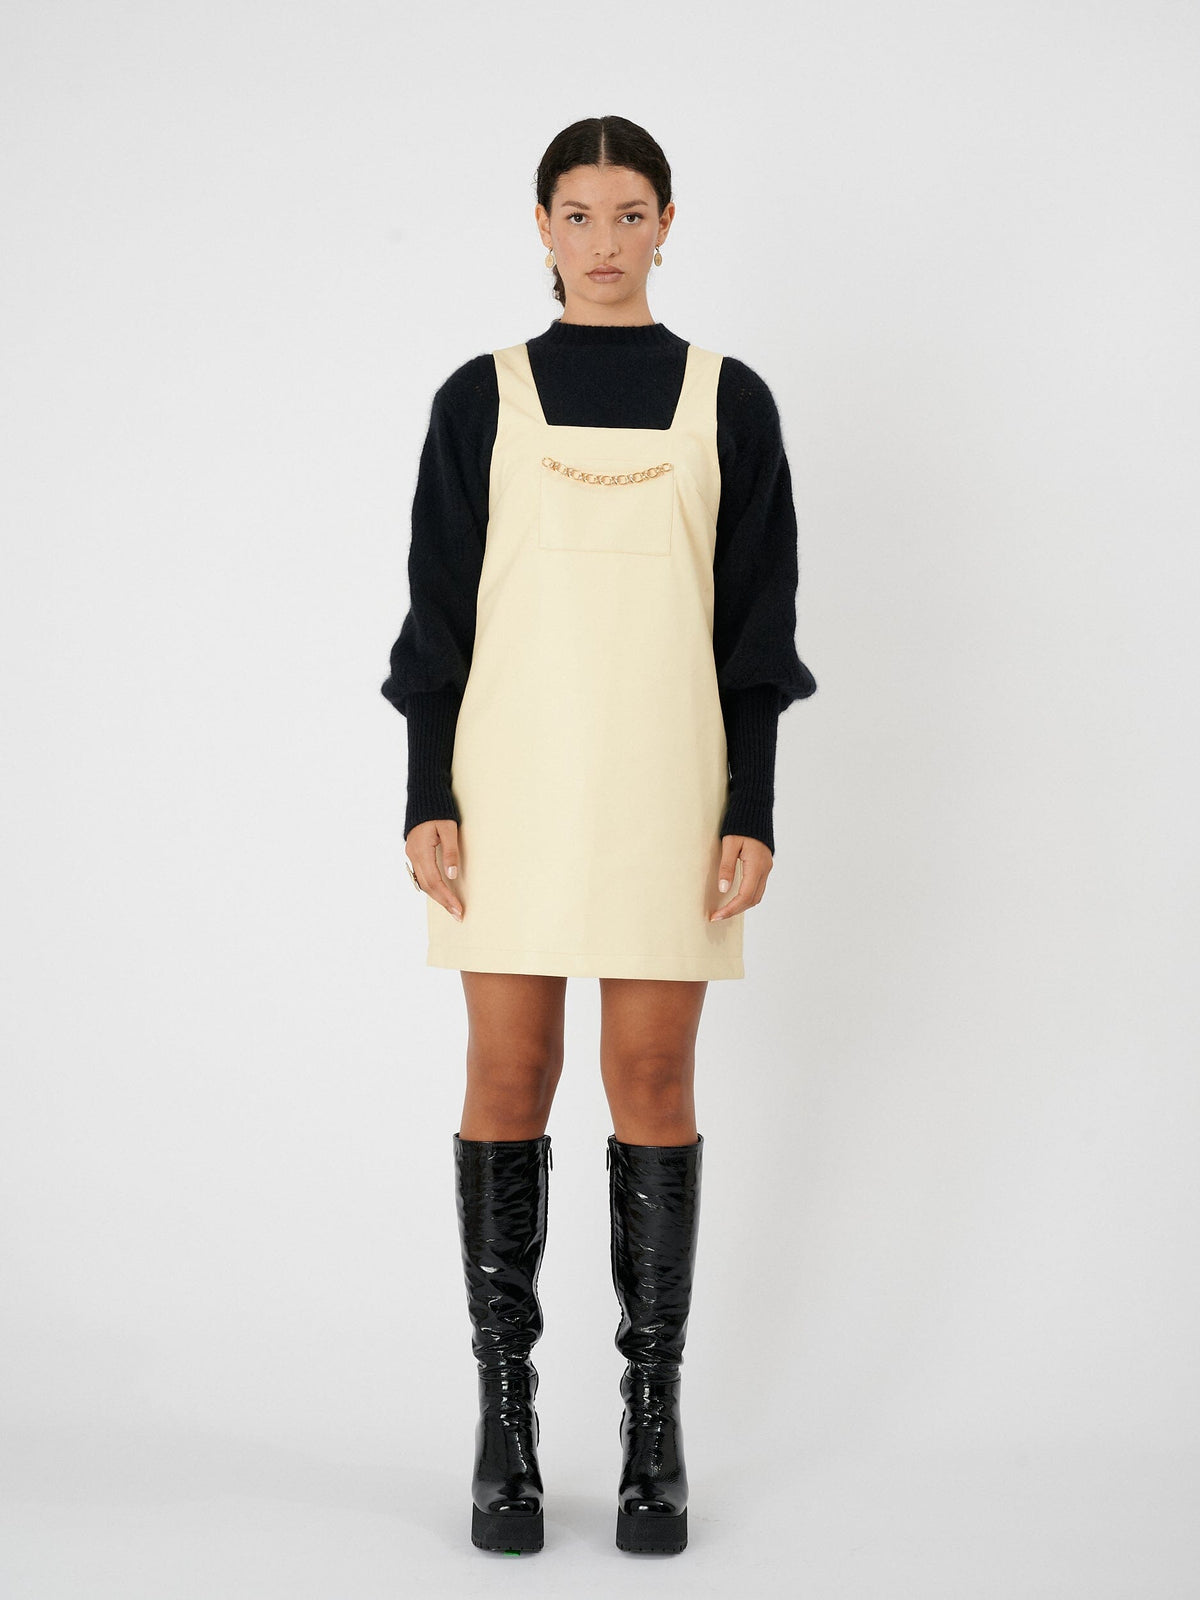 SASHA - Chasuble dress with gold chain in recycled leather Yellow Dress Fête Impériale